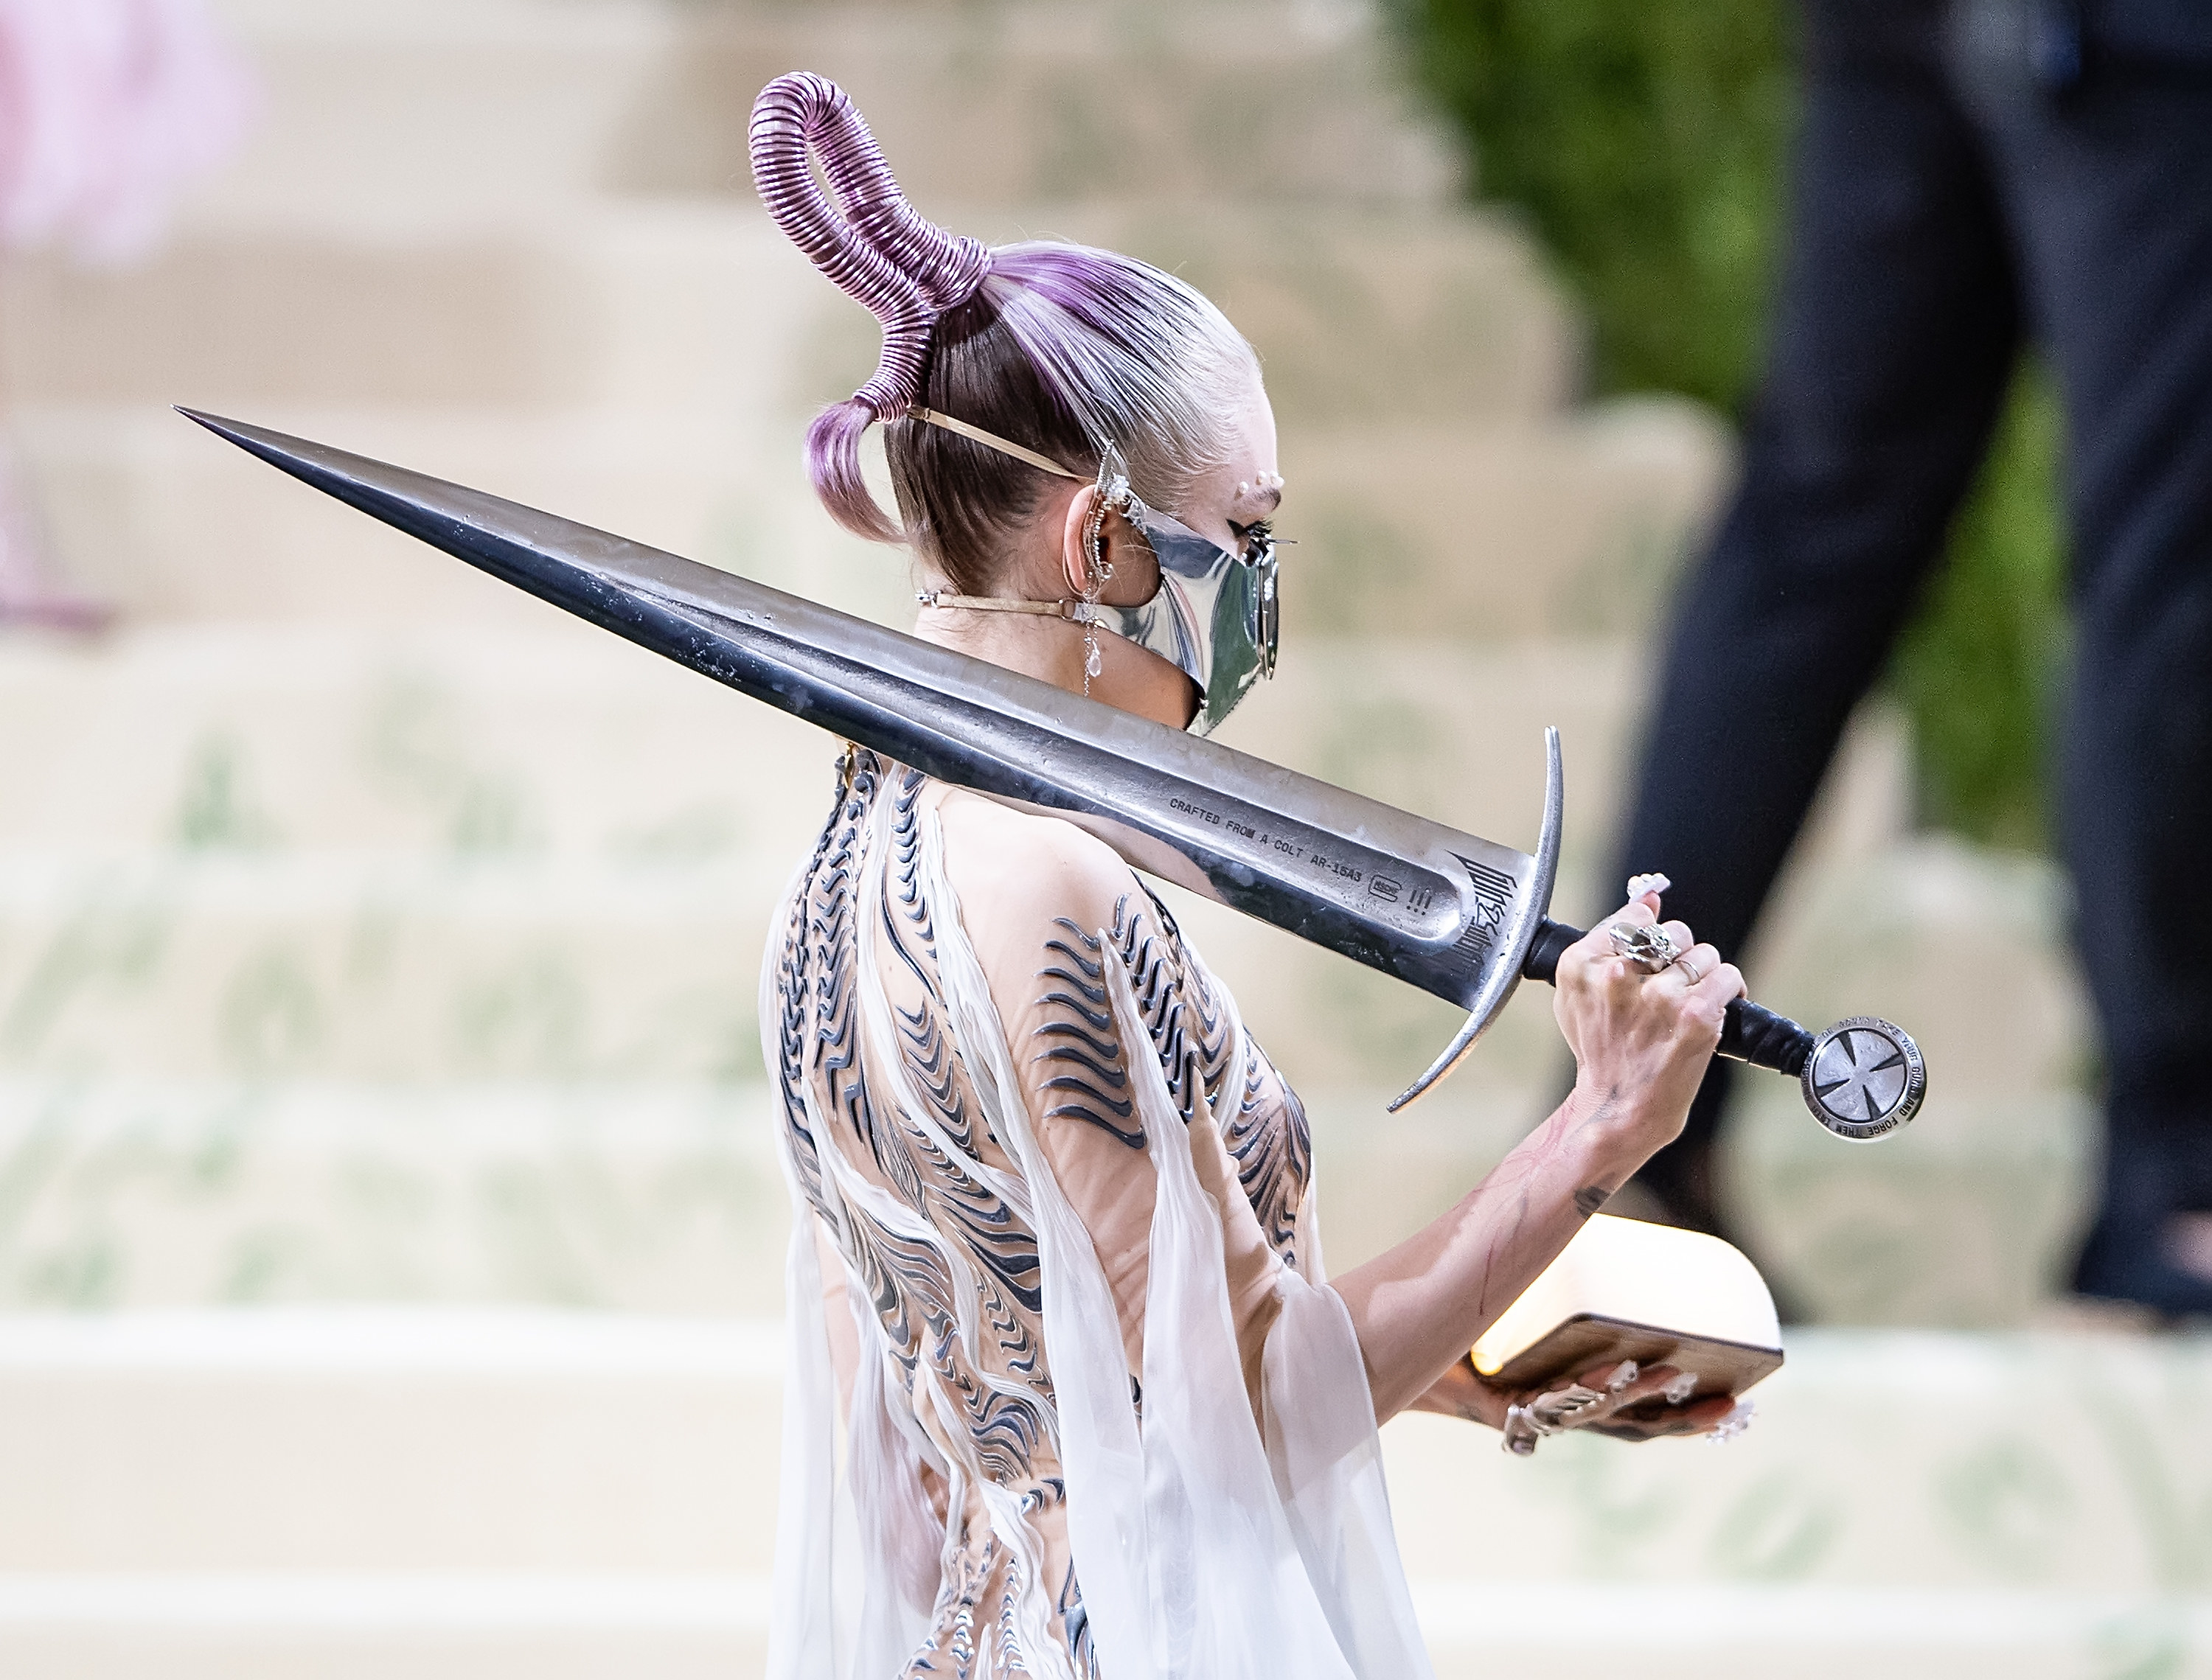 Grimes holds the sword, leaning it on her shoulder